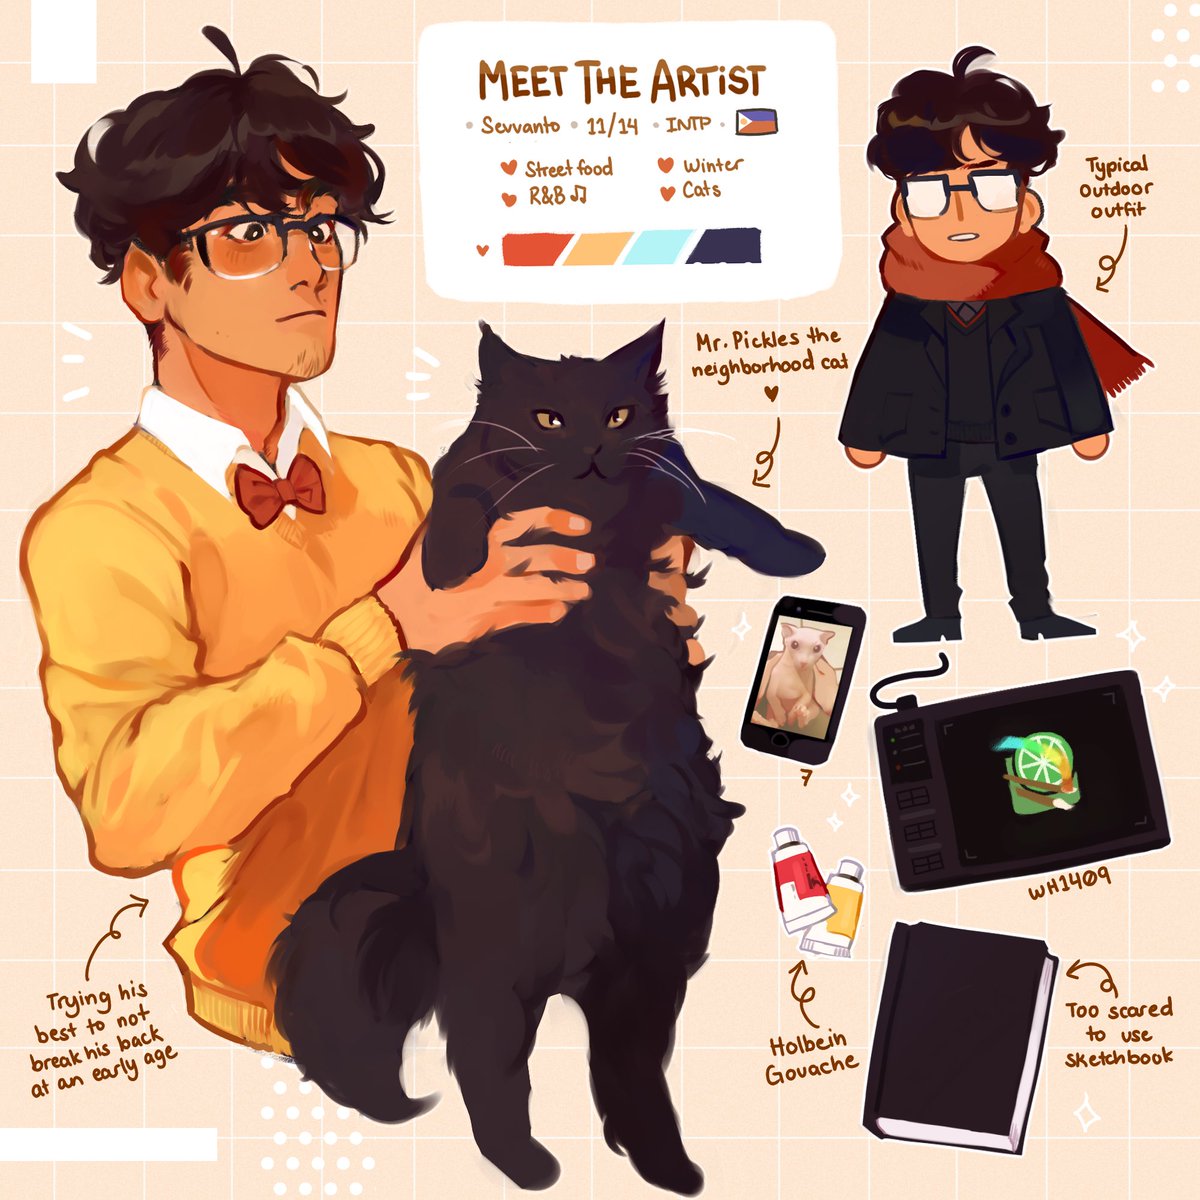 Meet the artist ? 

UHHHHH Hope I'm not too late for these :"DD 